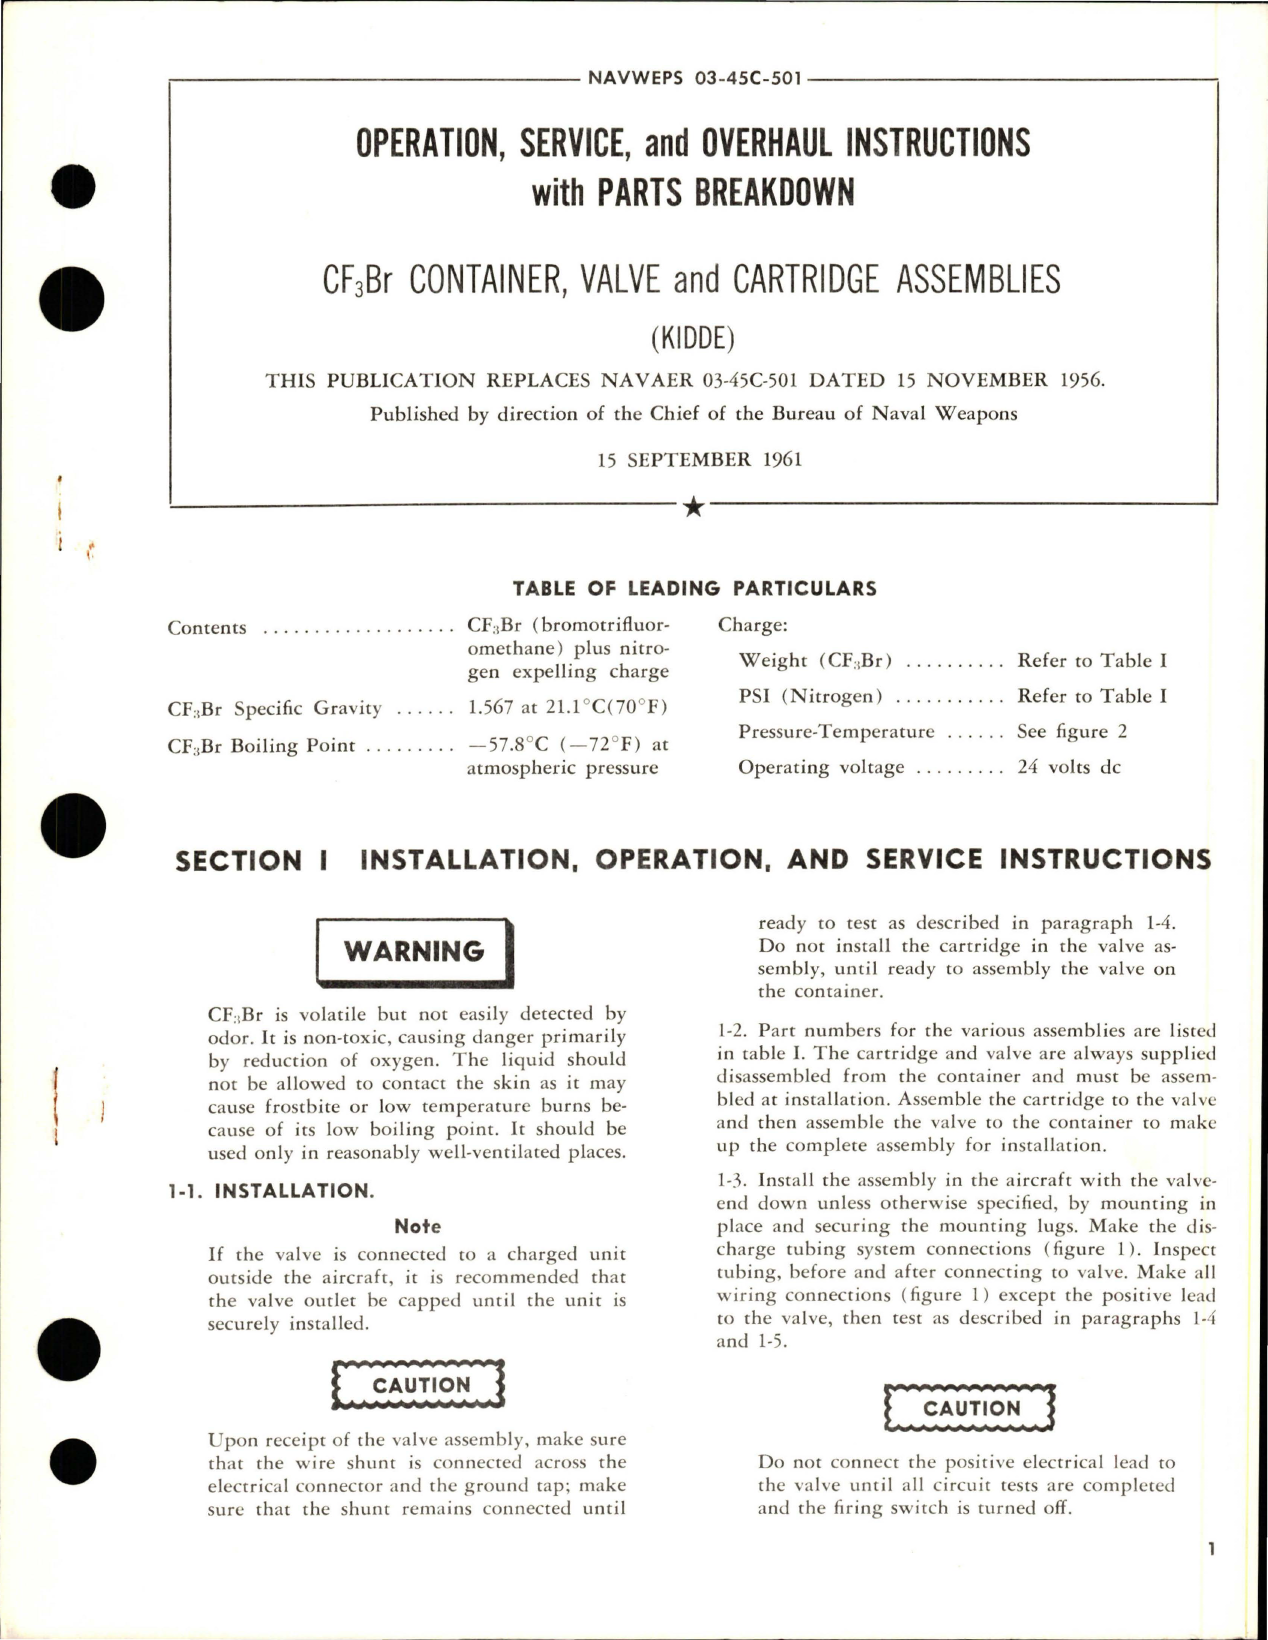 Sample page 1 from AirCorps Library document: Operation, Service and Overhaul Instructions with Parts Breakdown for CF3Br Container, Valve and Cartridge Assemblies